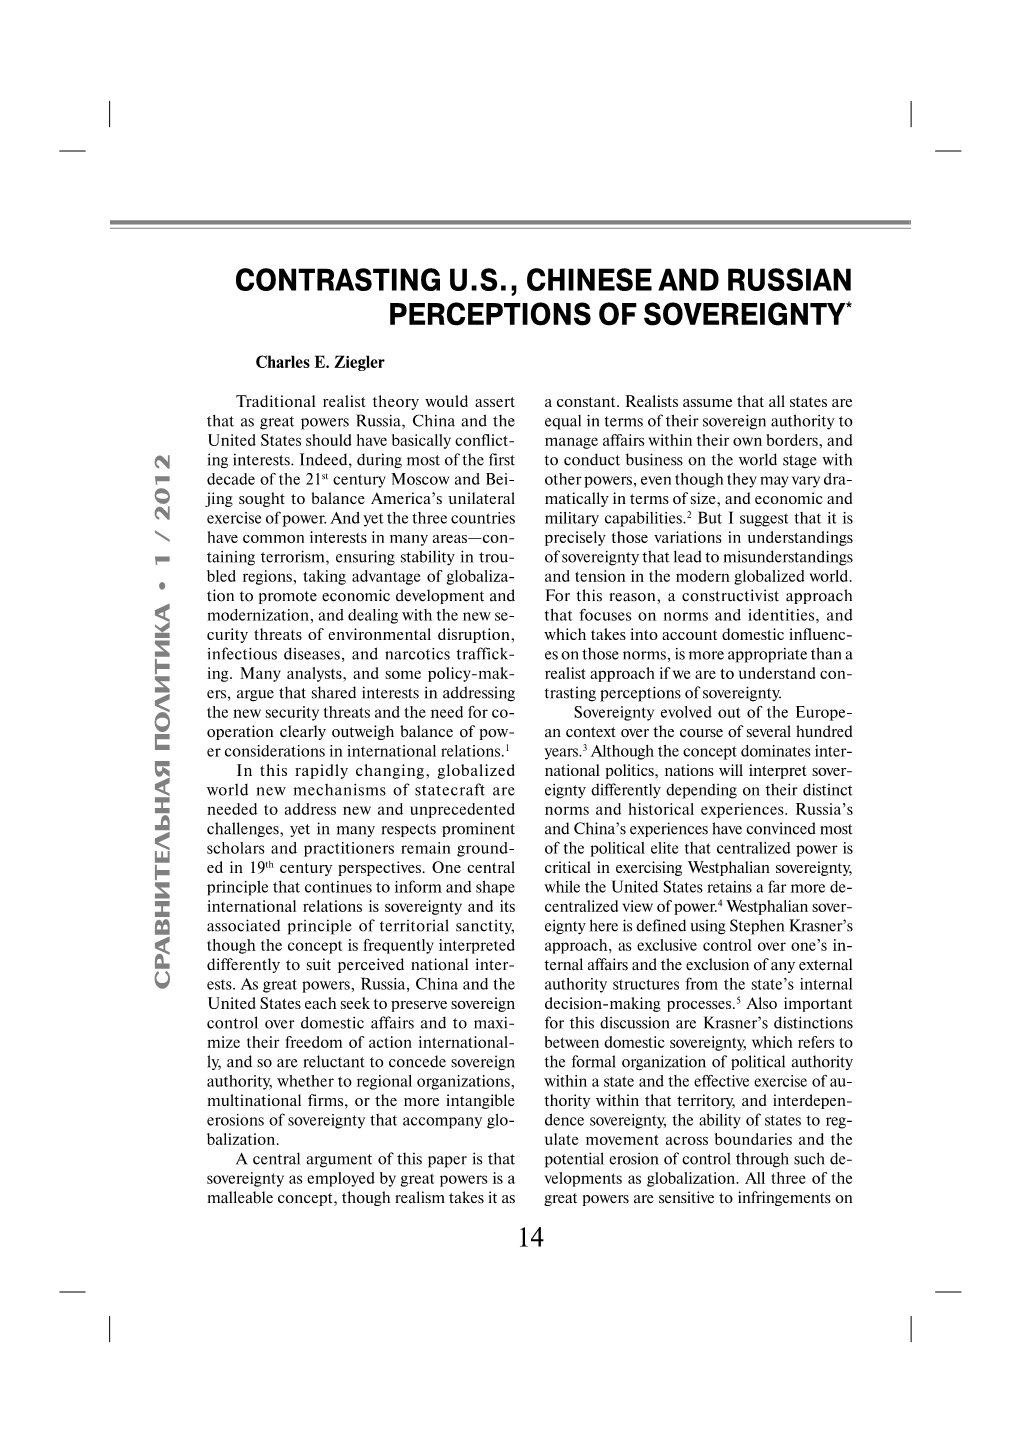 Contrasting U.S., Chinese and Russian Perceptions of Sovereignty*